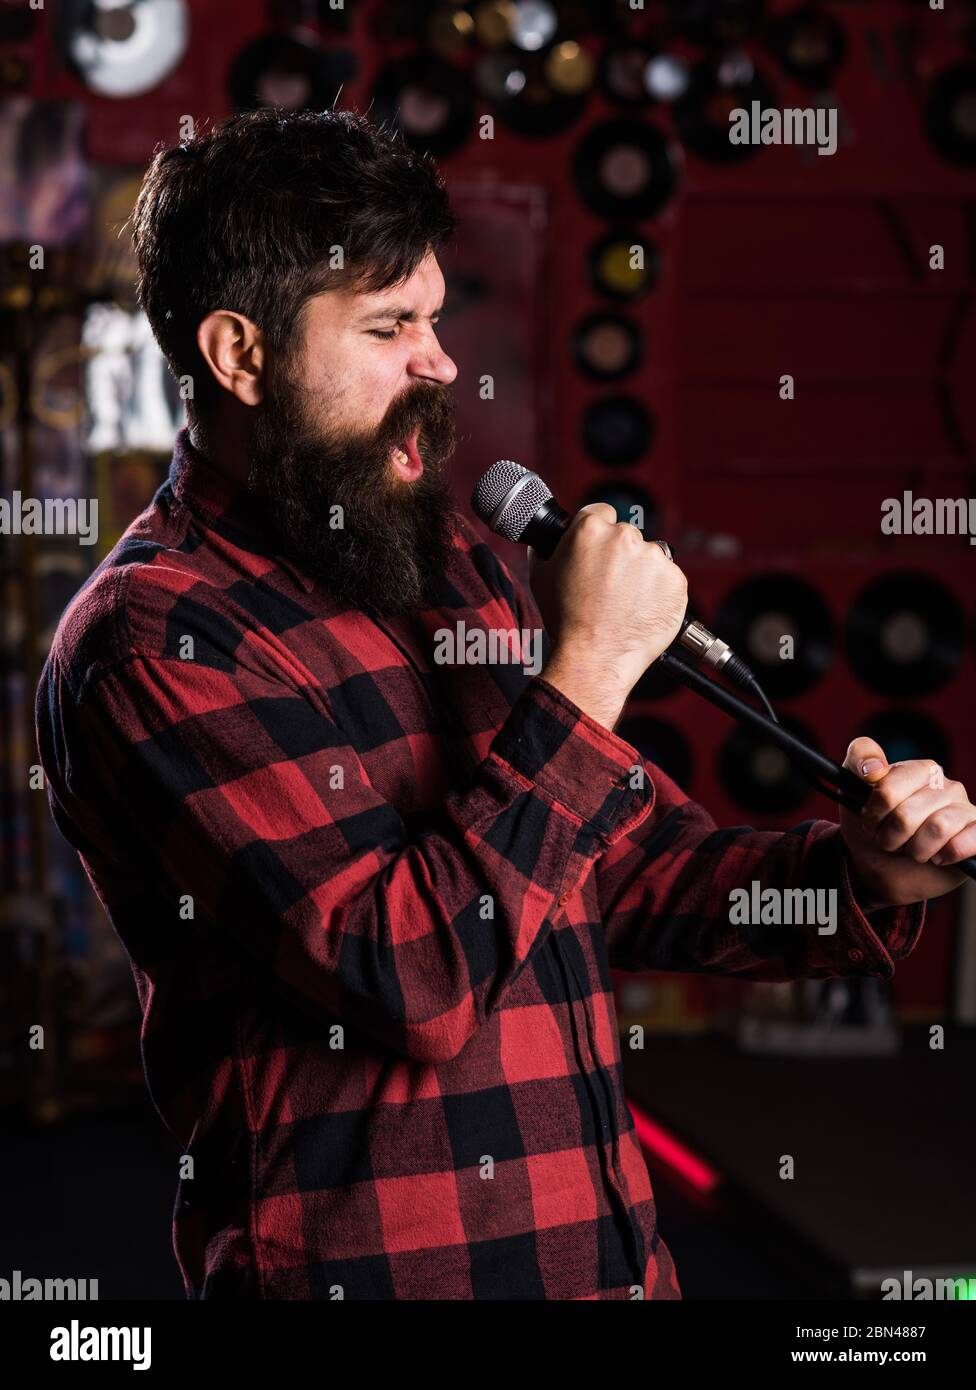 Man with enthusiastic face holds microphone, singing song, karaoke club  background. Musician with beard and mustache singing song in karaoke. Music  and leisure concept. Hipster likes to sing on stage Stock Photo -